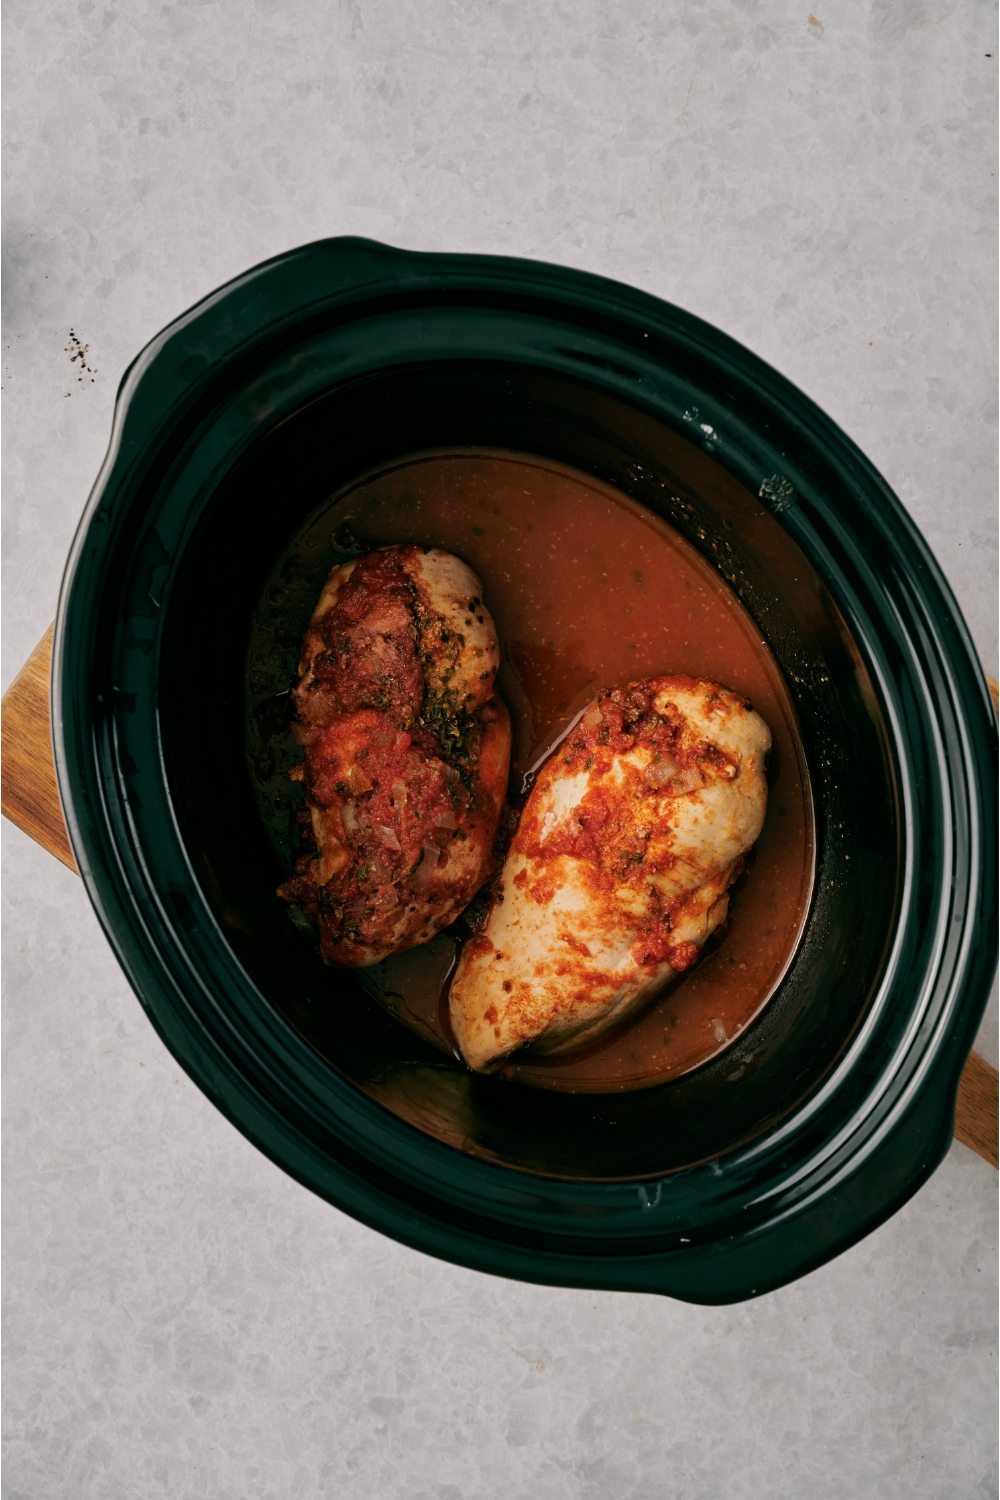 A crock pot filled with two chicken breasts covered in a red sauce.